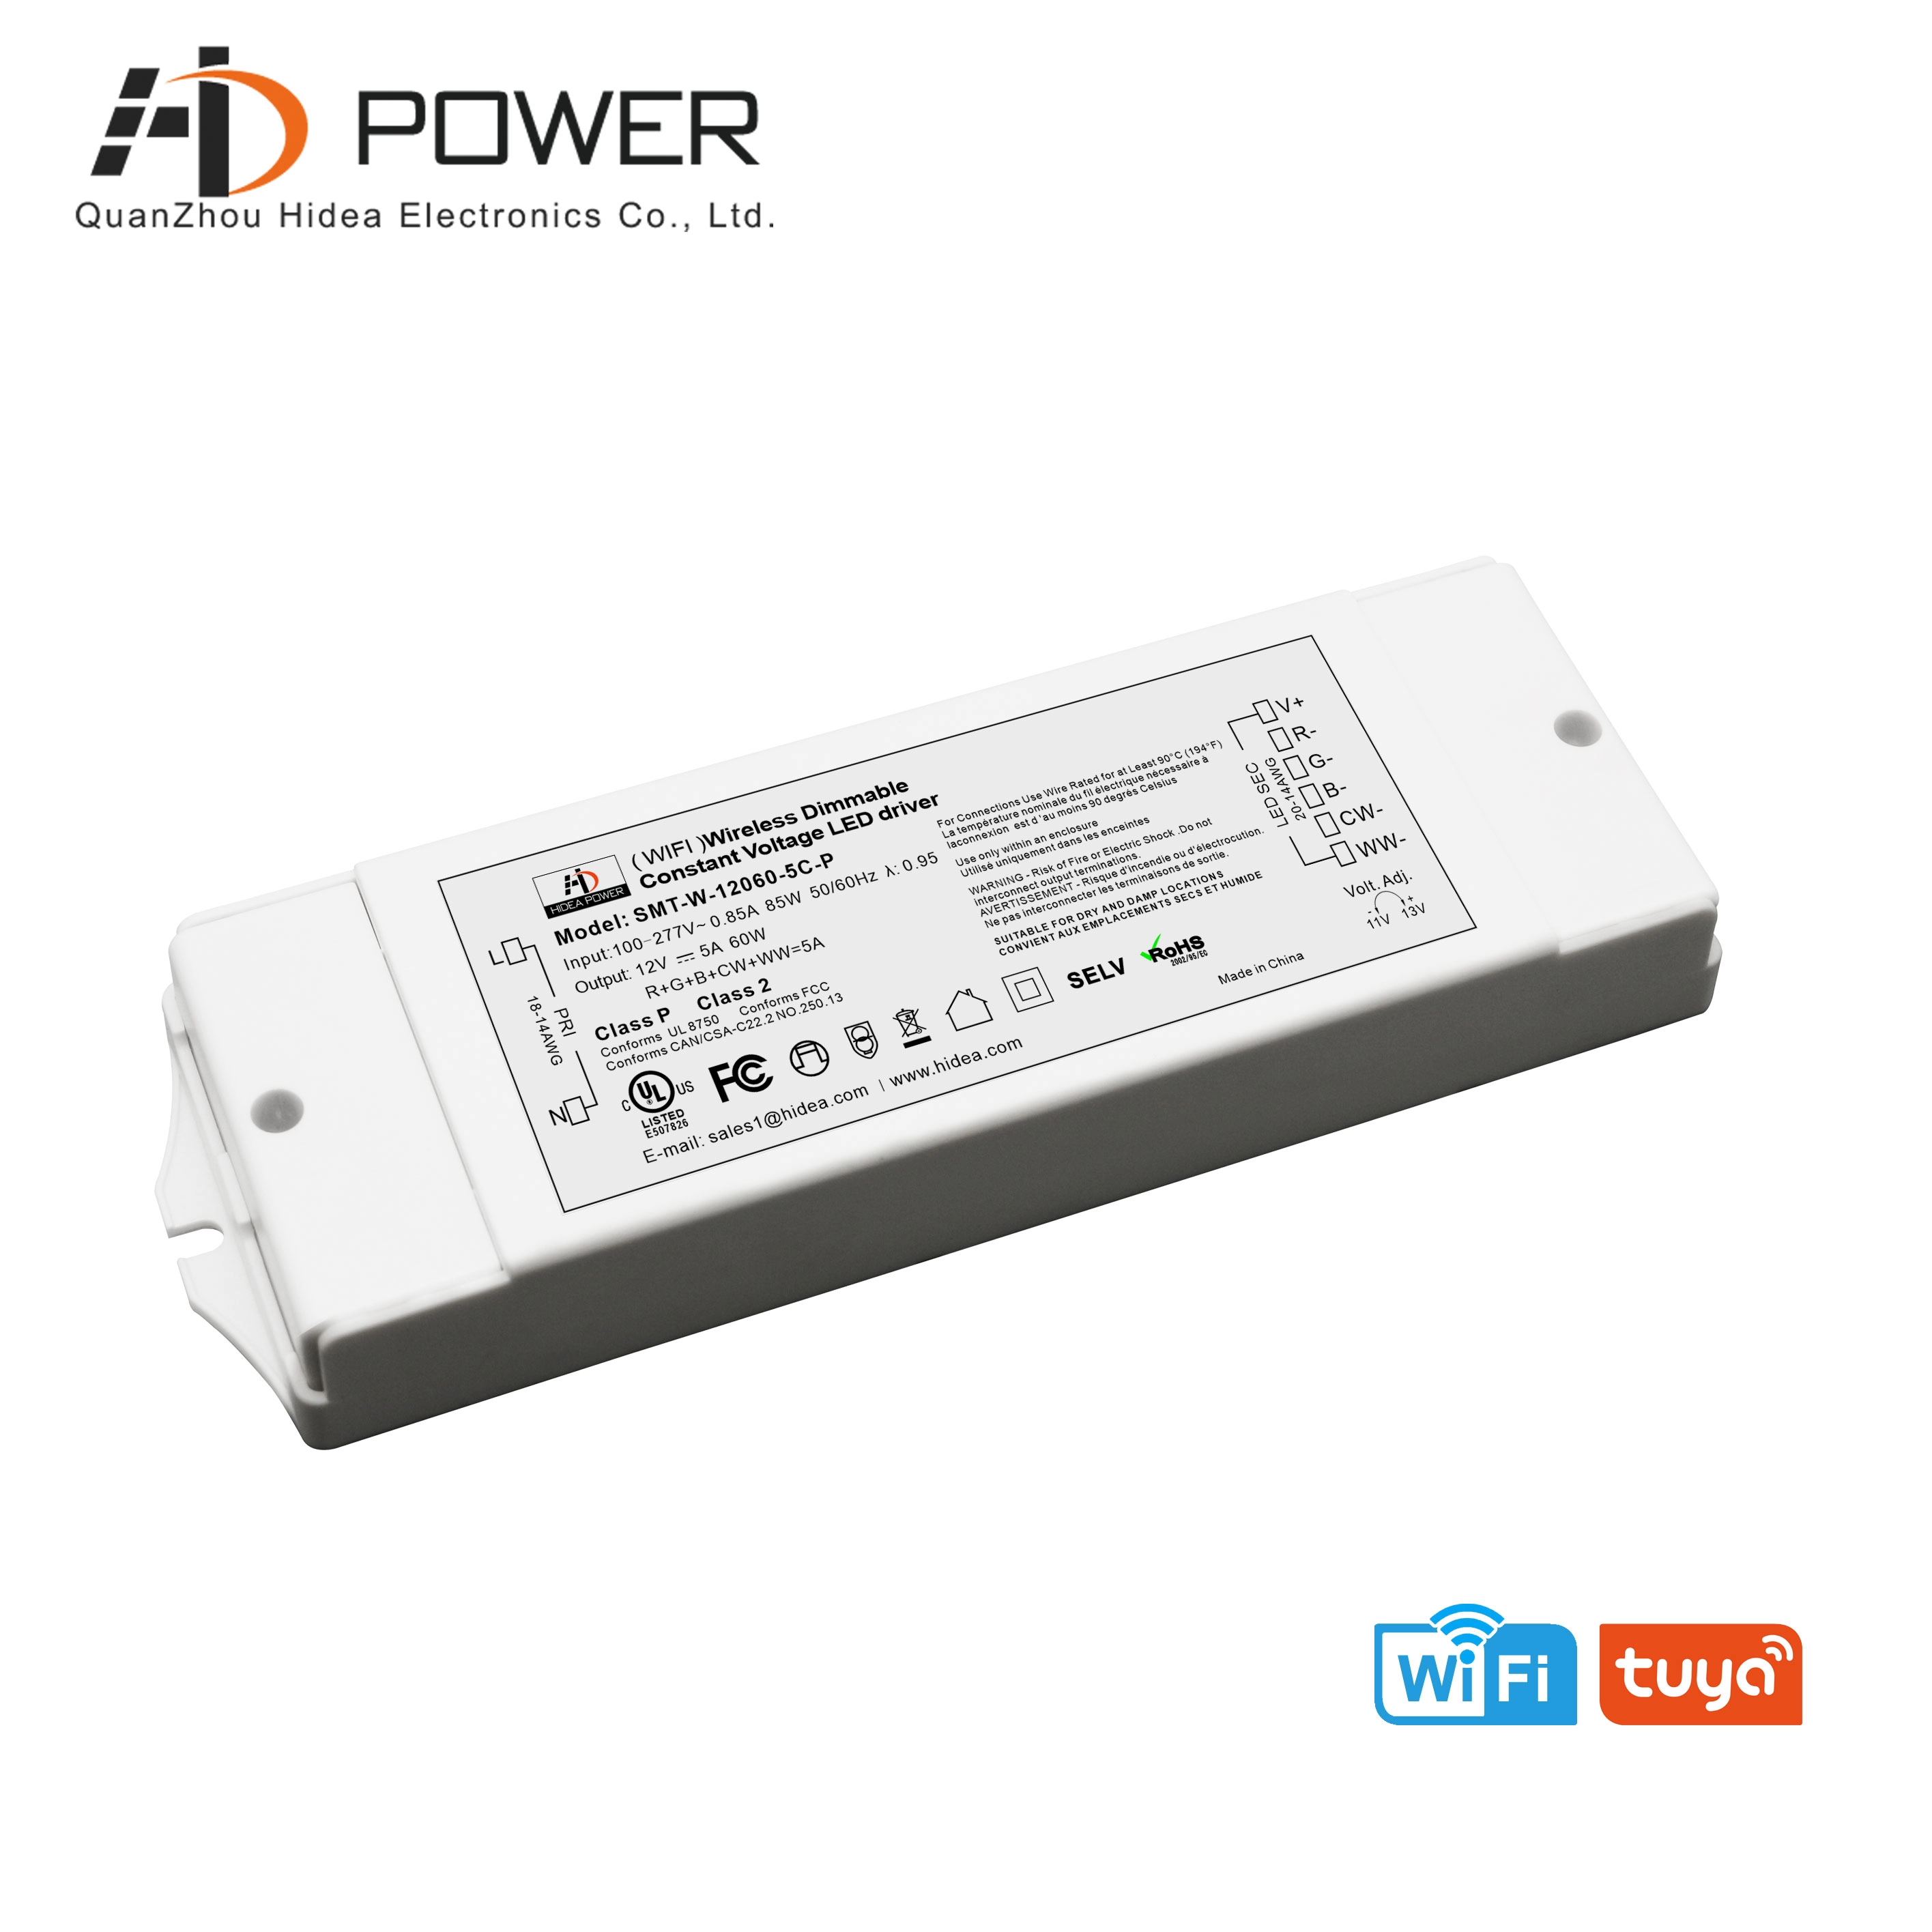 7 years warranty12v 60w dimmable led driver